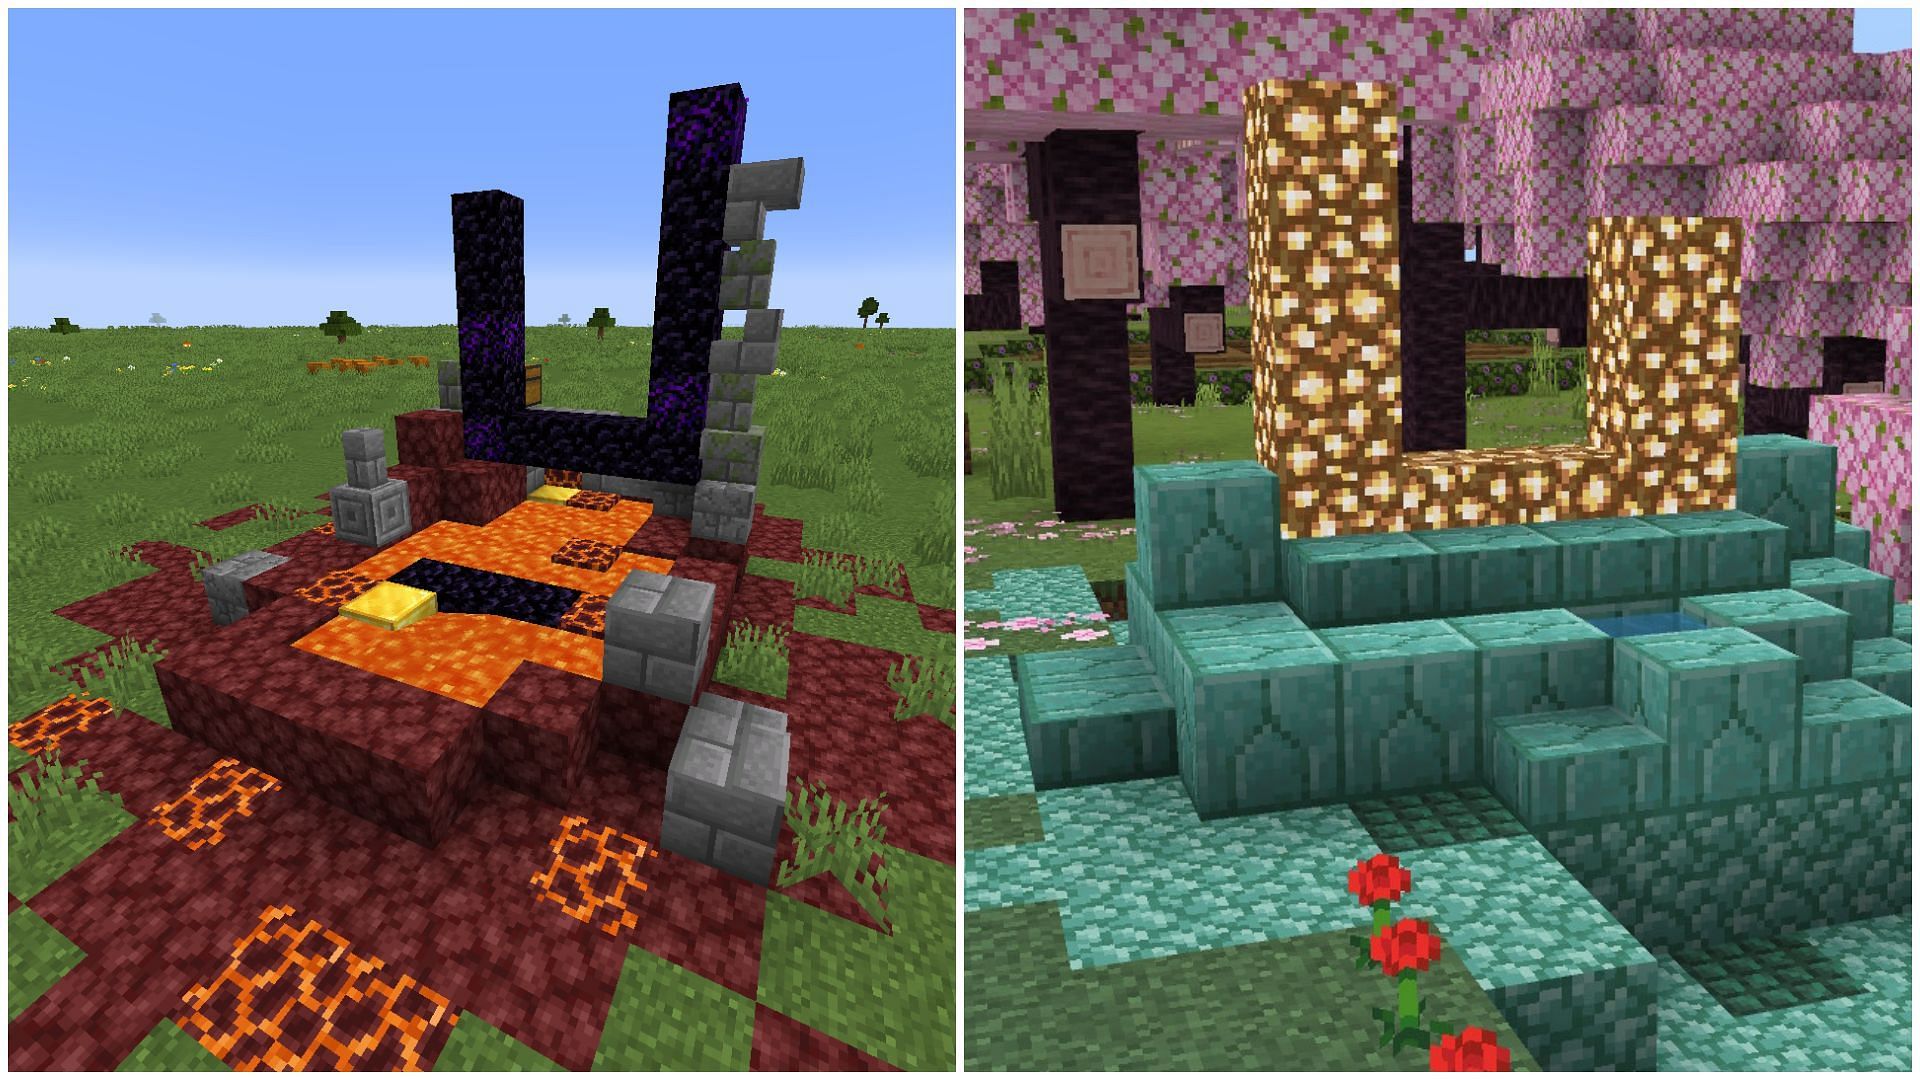 Minecraft Redditor changed ruined Nether portal into a ruined Aether portal (Image via Sportskeeda)